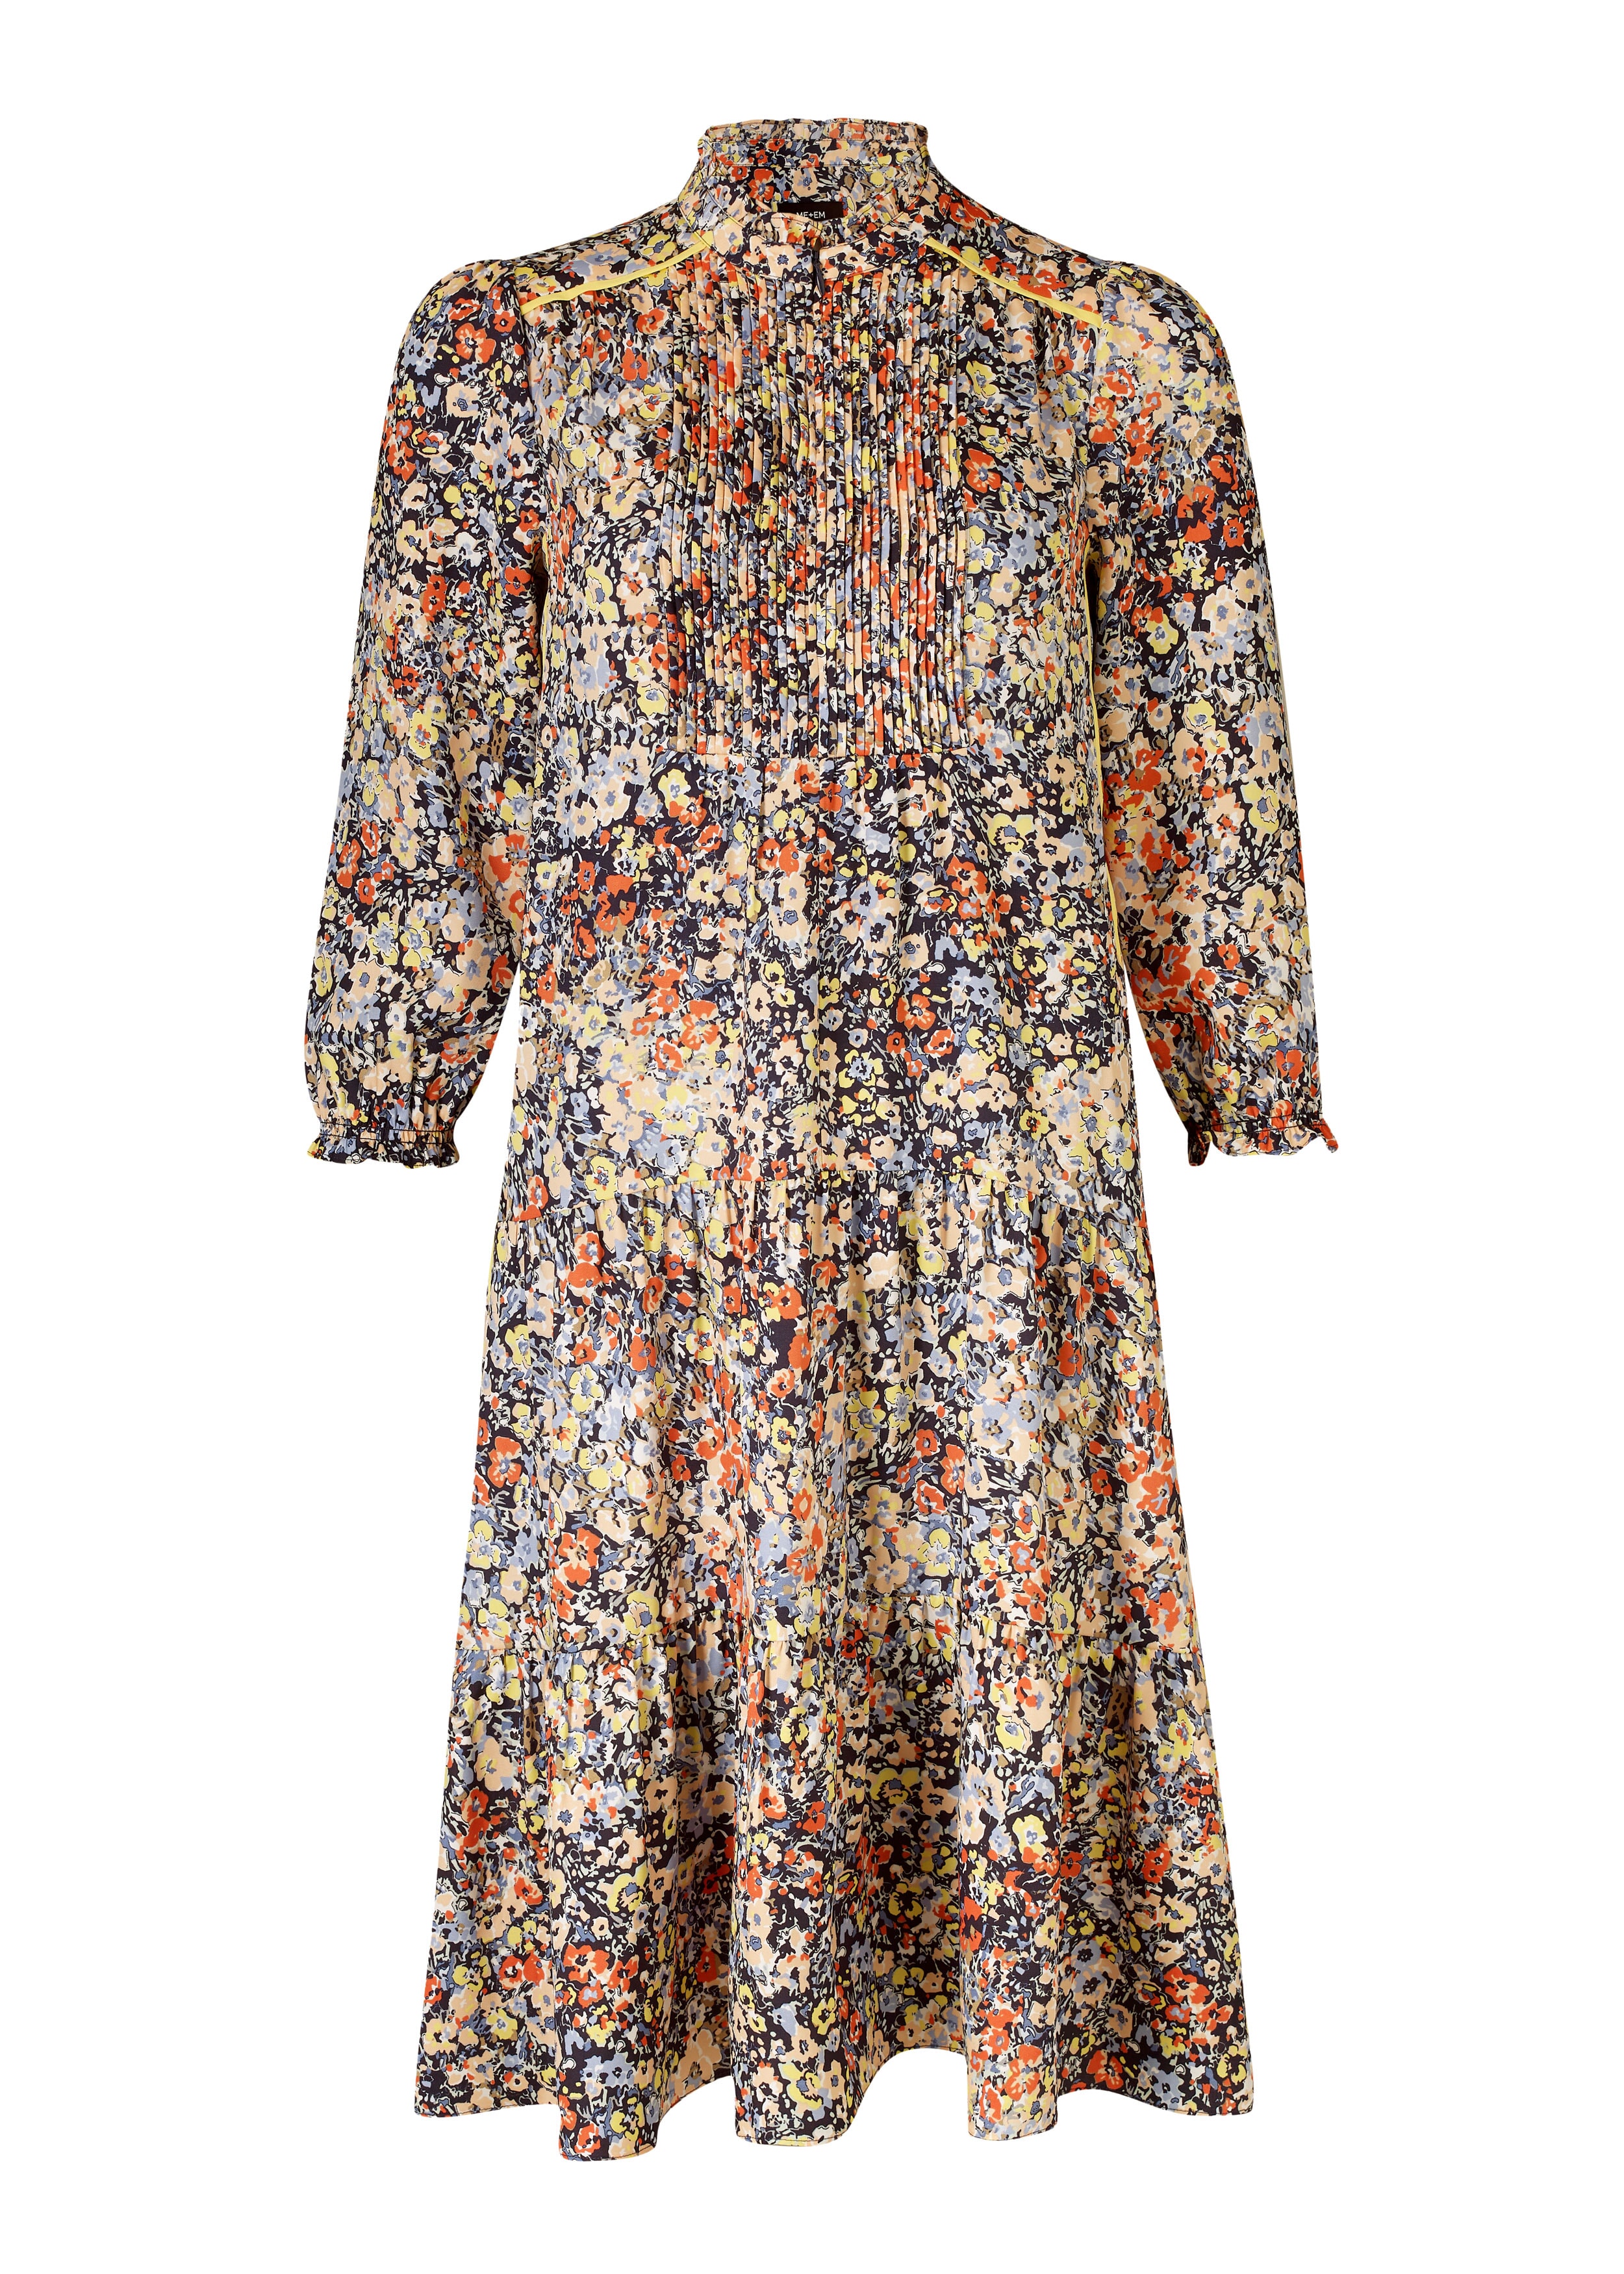 Hand-Painted Floral Swing Dress + Belt Washed Peach/Yellow/Burnt Orange ...